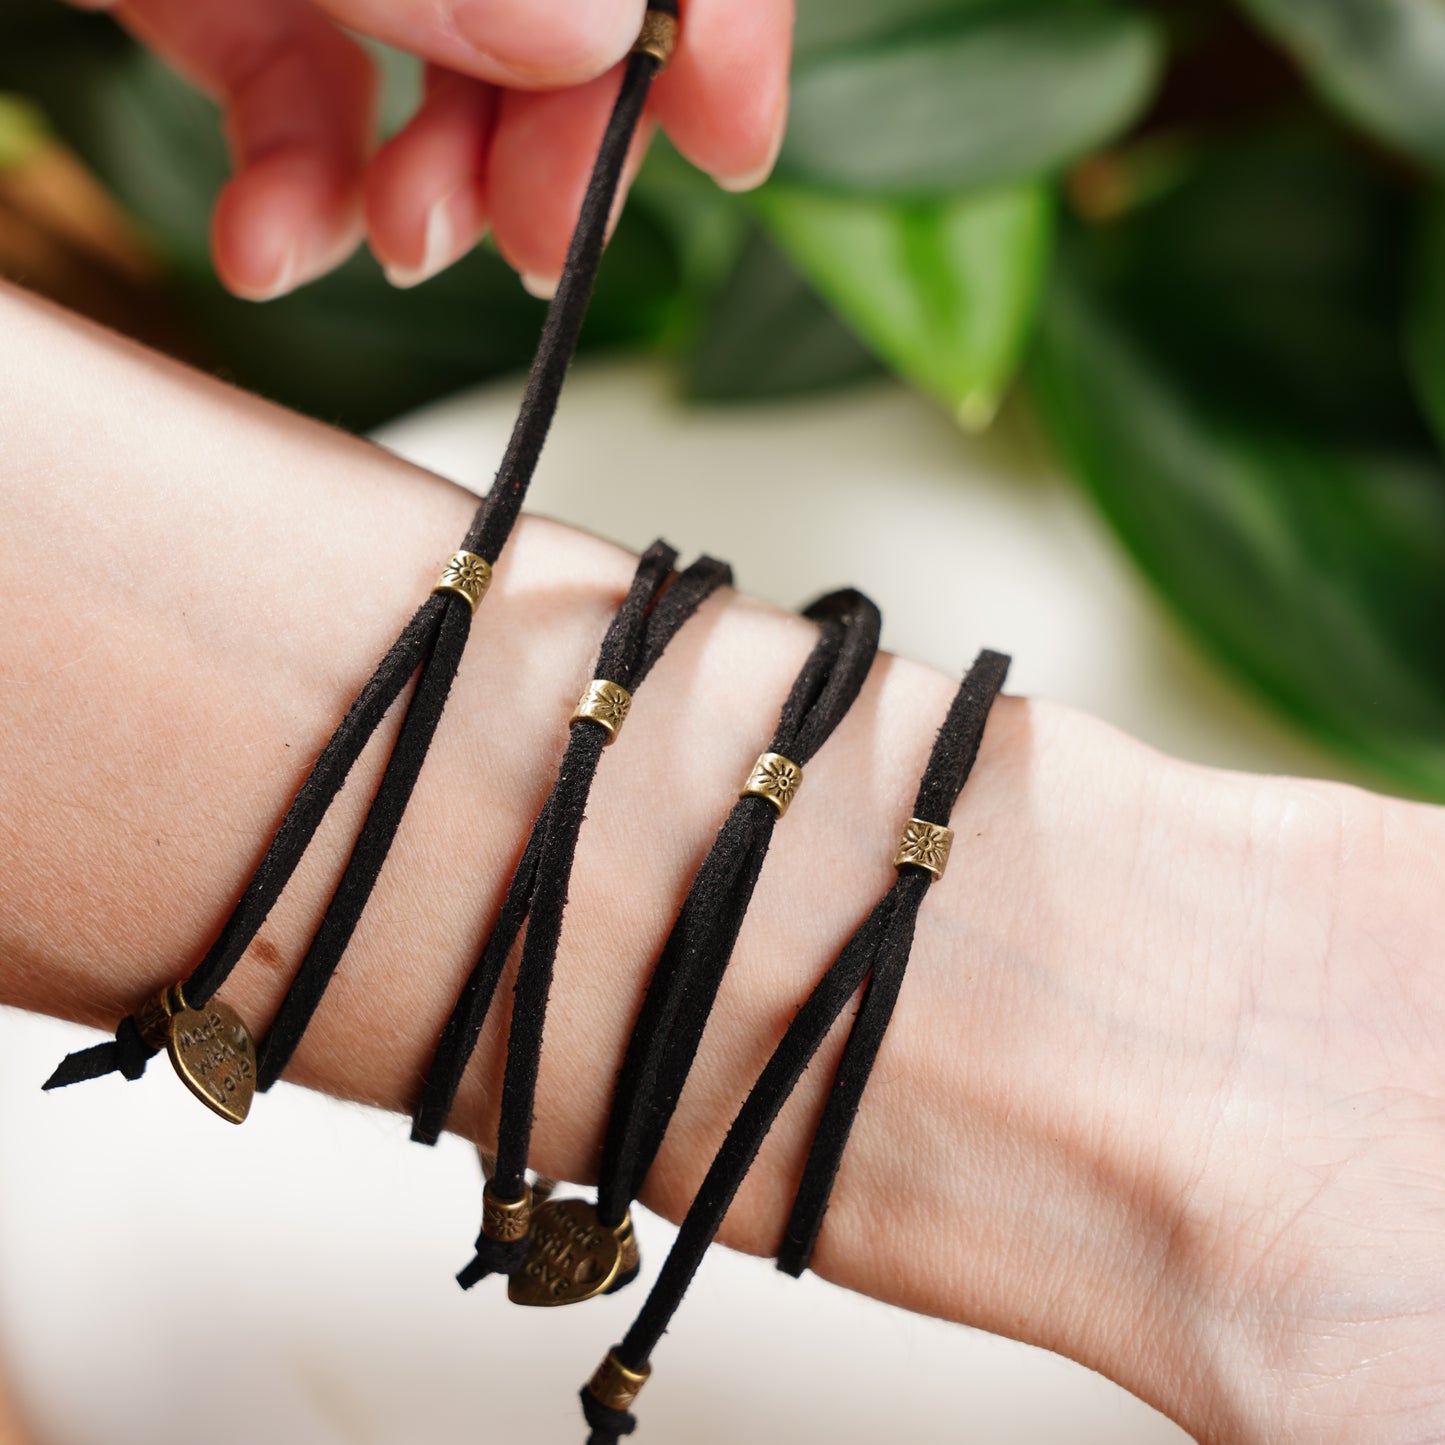 Lucky Bracelet Set For Good Luck, Wealth, Wisdom, and Protection - Black